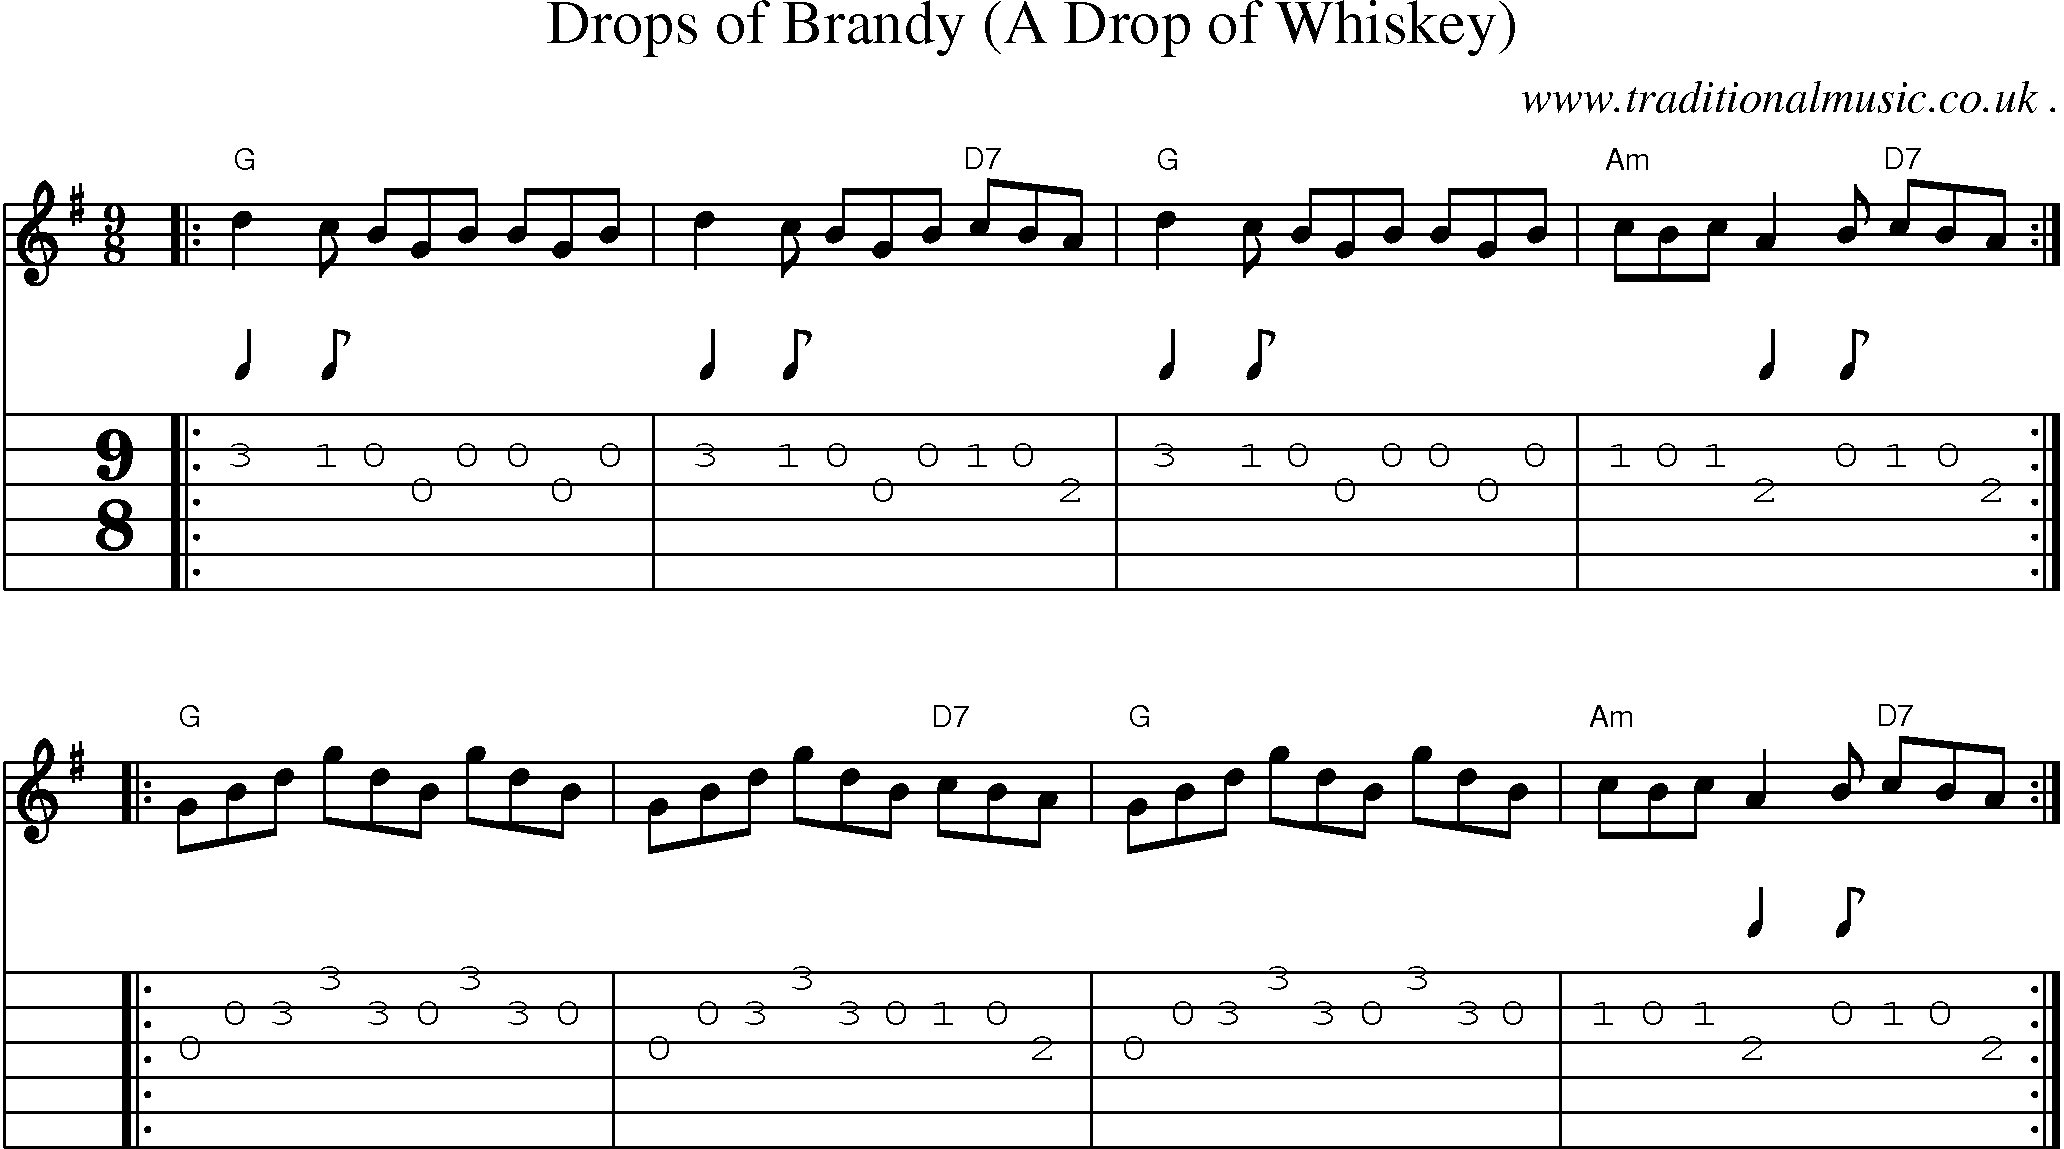 Sheet-music  score, Chords and Guitar Tabs for Drops Of Brandy A Drop Of Whiskey